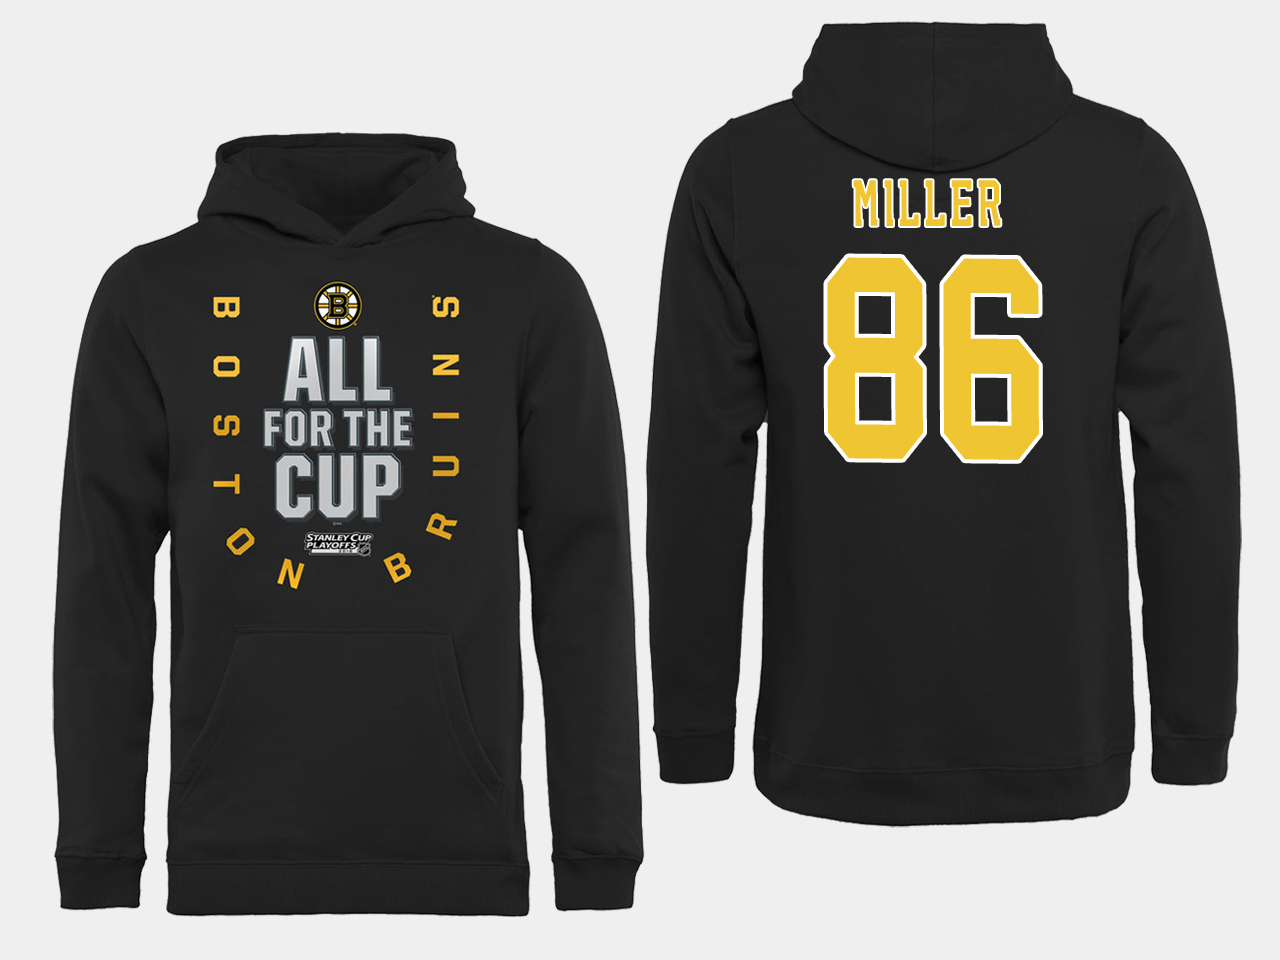 NHL Men Boston Bruins #86 Miller Black All for the Cup Hoodie->boston red sox->MLB Jersey